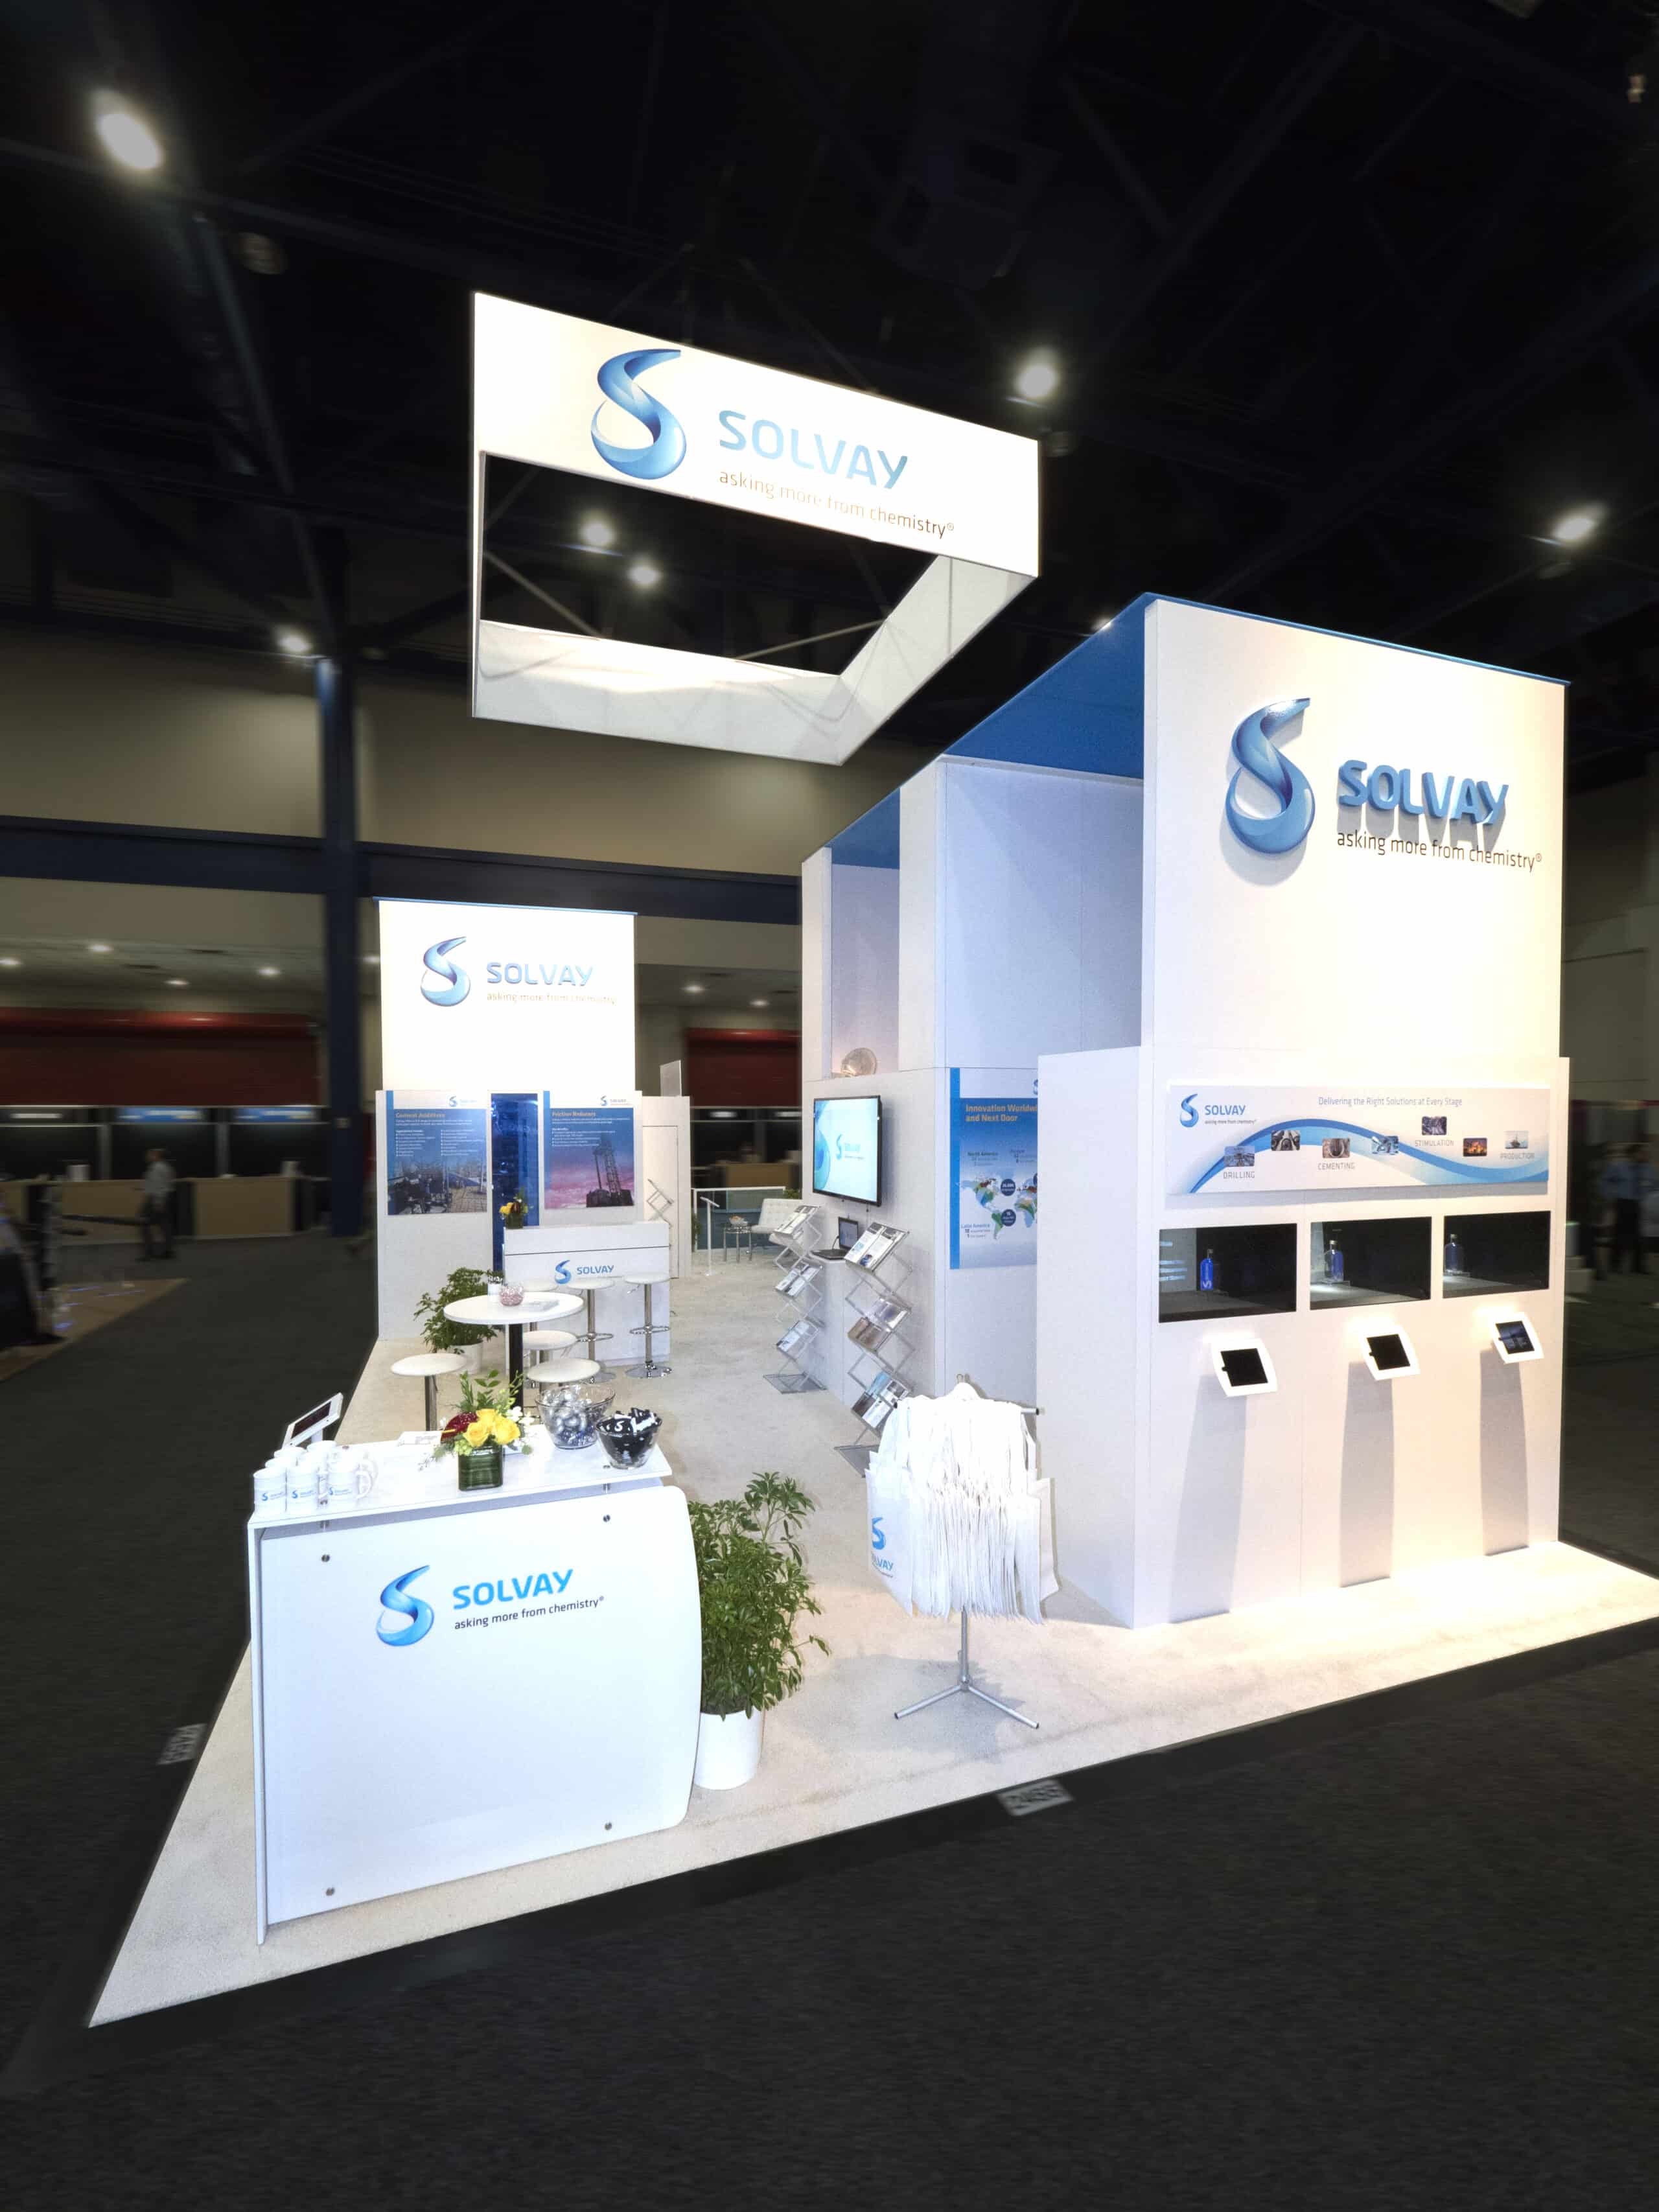 Houston, TX - SPE ATCE 2015 - Solvay at the Exhibit Hall during the 2015 Society of Petroleum Engineer's Annual Technical Conference and Exhibition here today, Thursday October 1, 2015. The ATCE meeting is taking place at the George R Brown Convention center which features the latest technologies, industry best practices, and new product launches for attendees from around the world. Photo by © SPE/Todd Buchanan 2015 Contact Info: todd@corporateeventimages.com